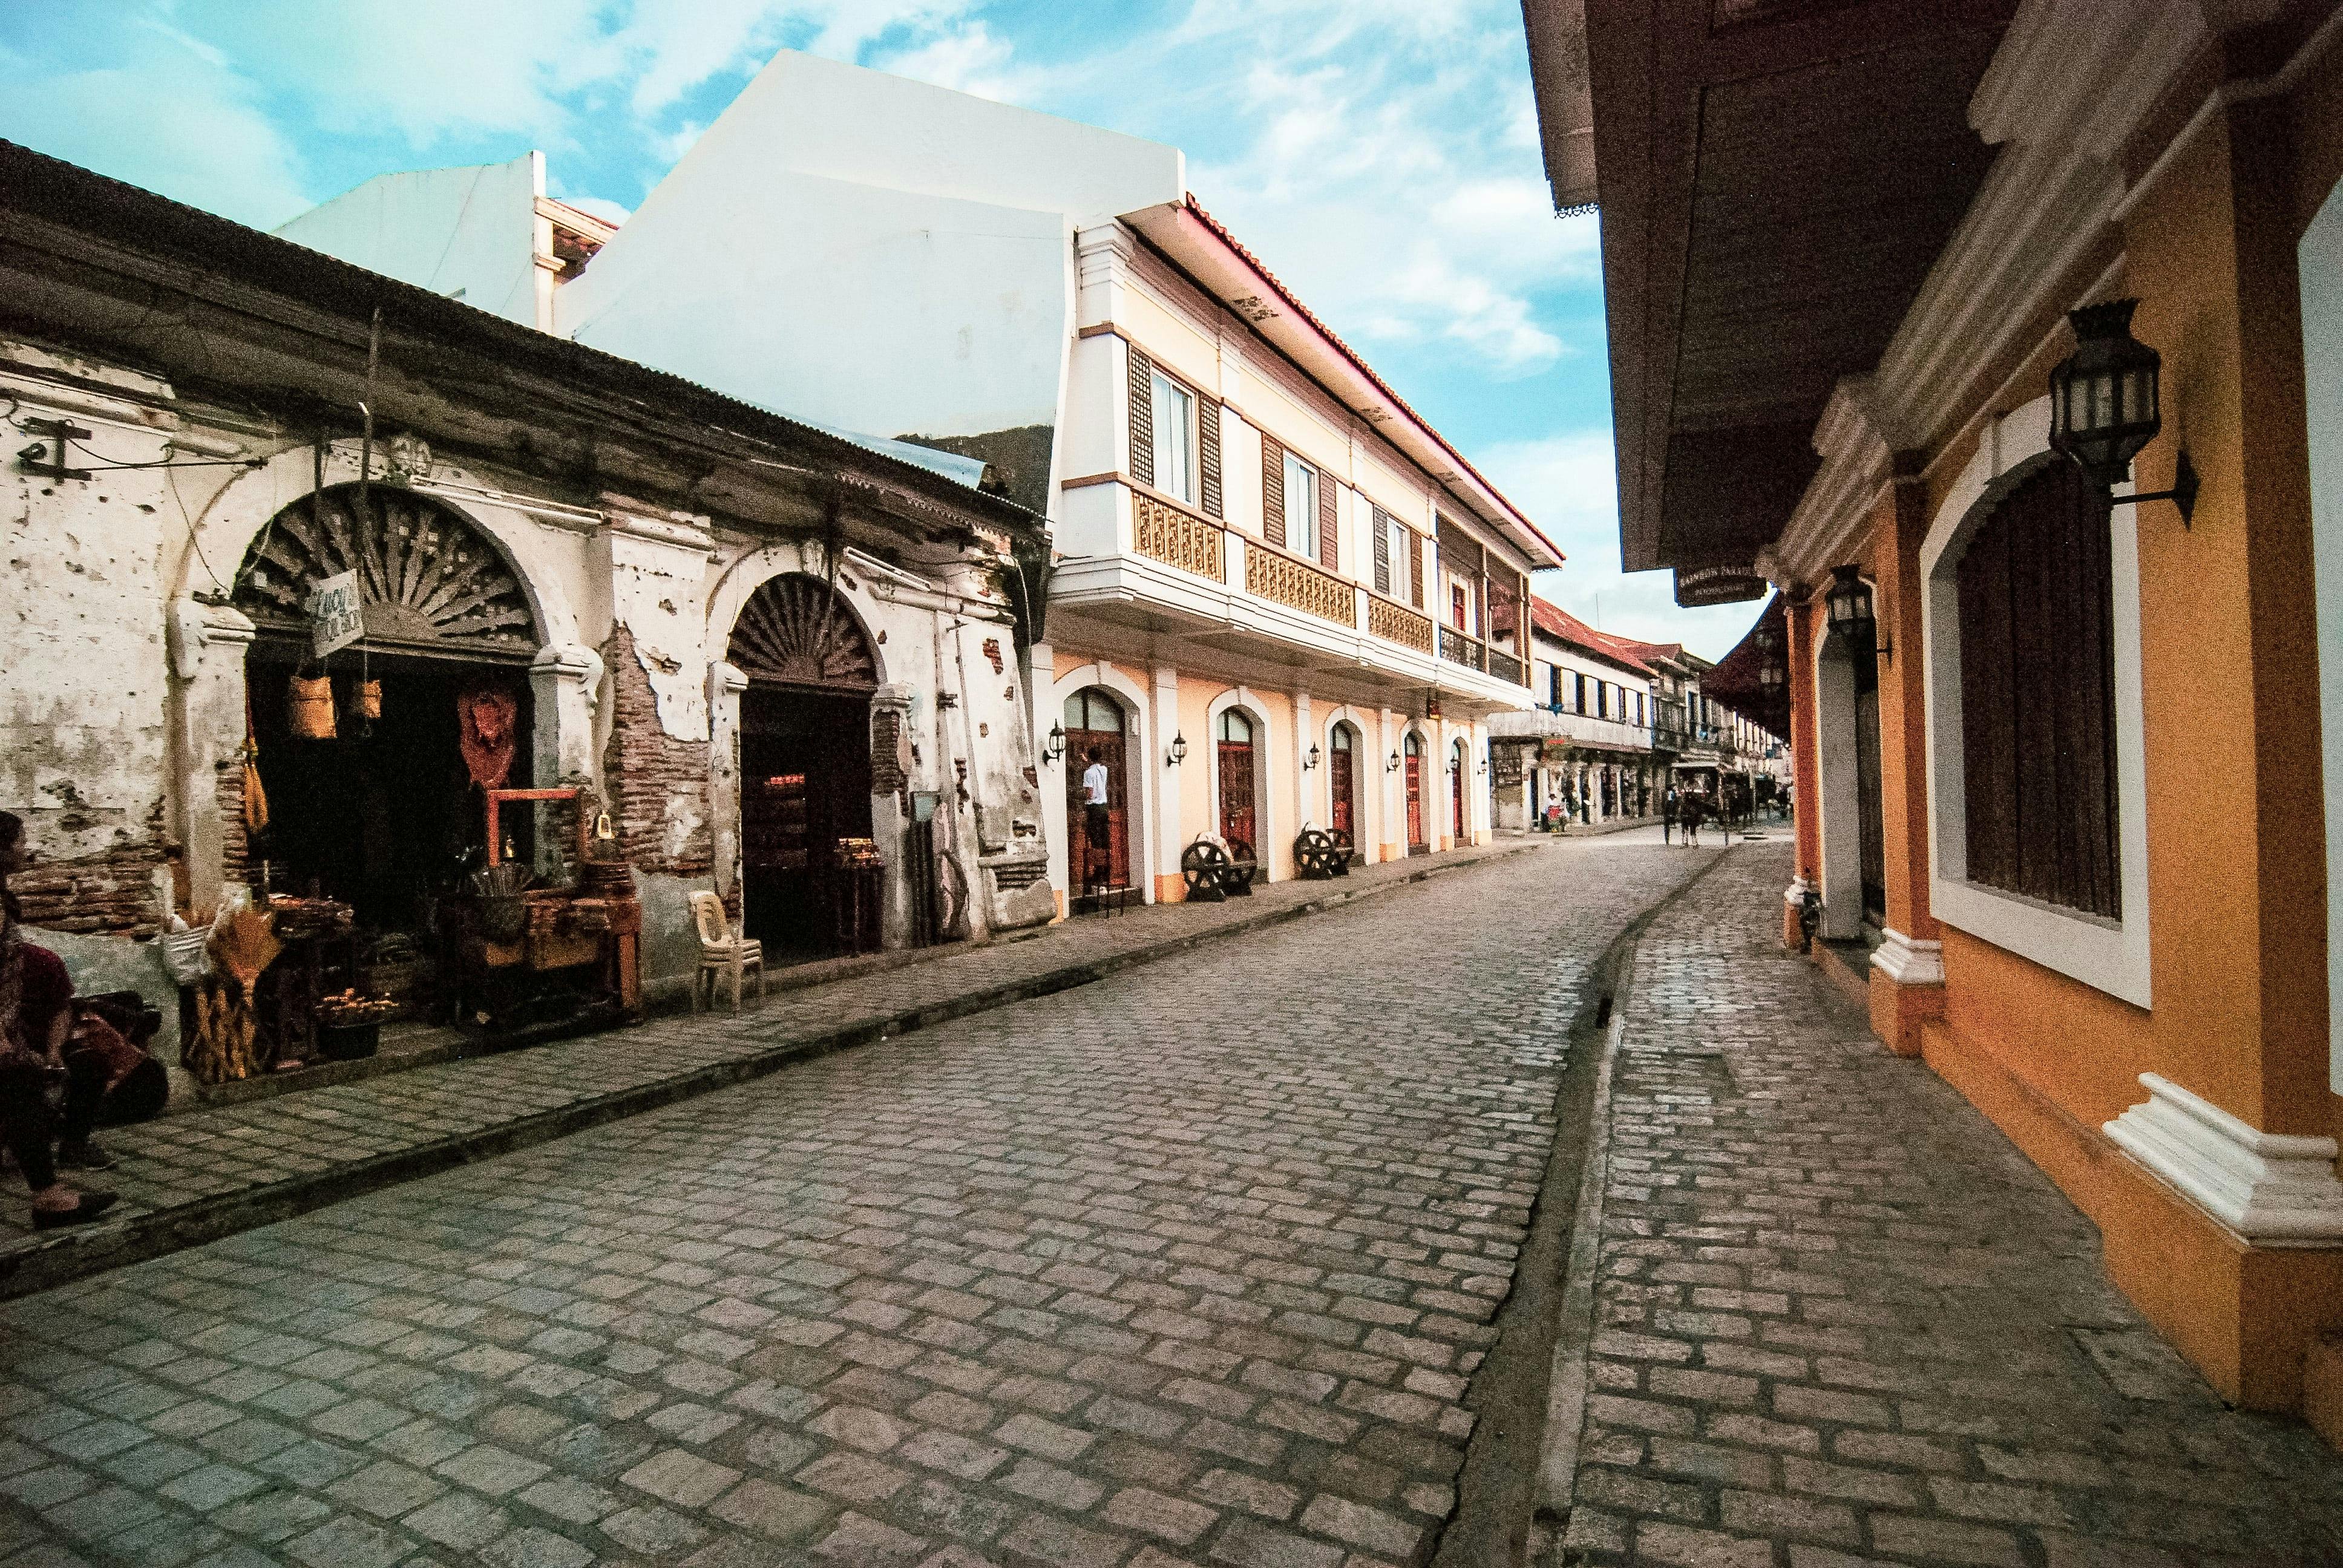 Spanish style structures in Calle Crisologo in Vigan